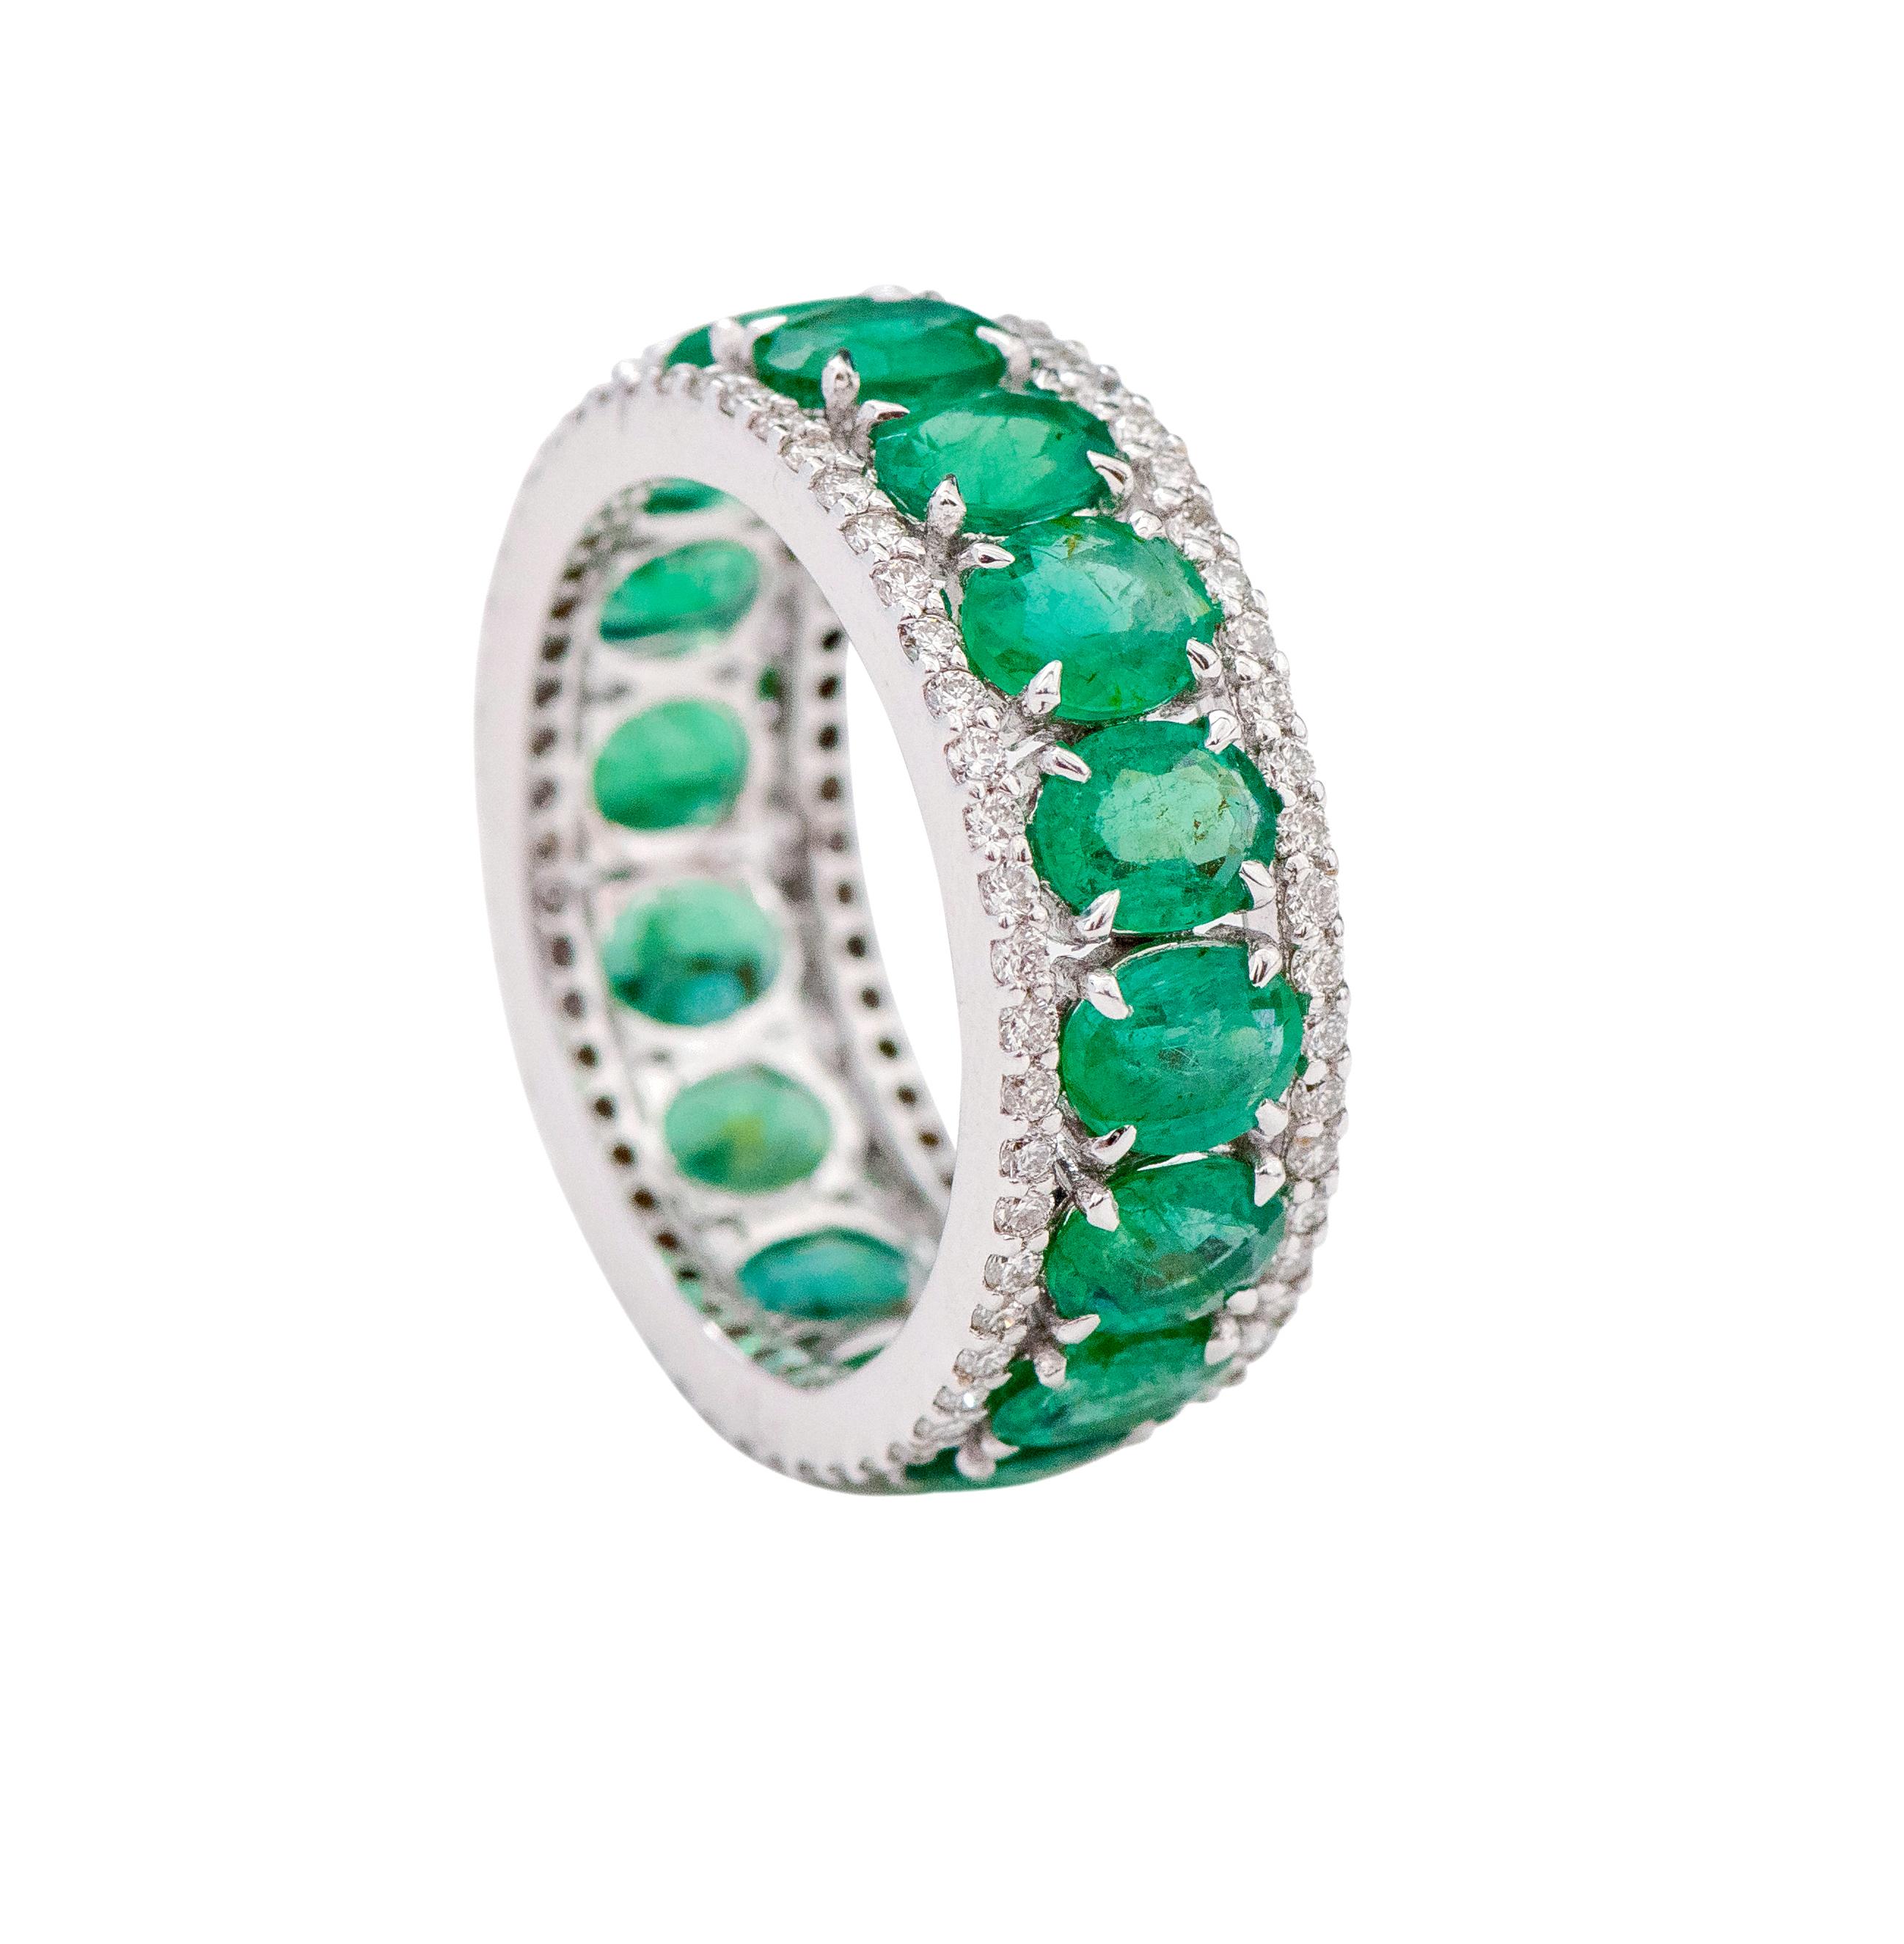 18 Karat White Gold 4.74 Carat Oval-Cut Natural Emerald and Diamond Eternity Band Ring

This impeccable shamrock green emerald and diamond band is exquisite. The solitaire horizontally placed oval shape emeralds in grain prong setting are